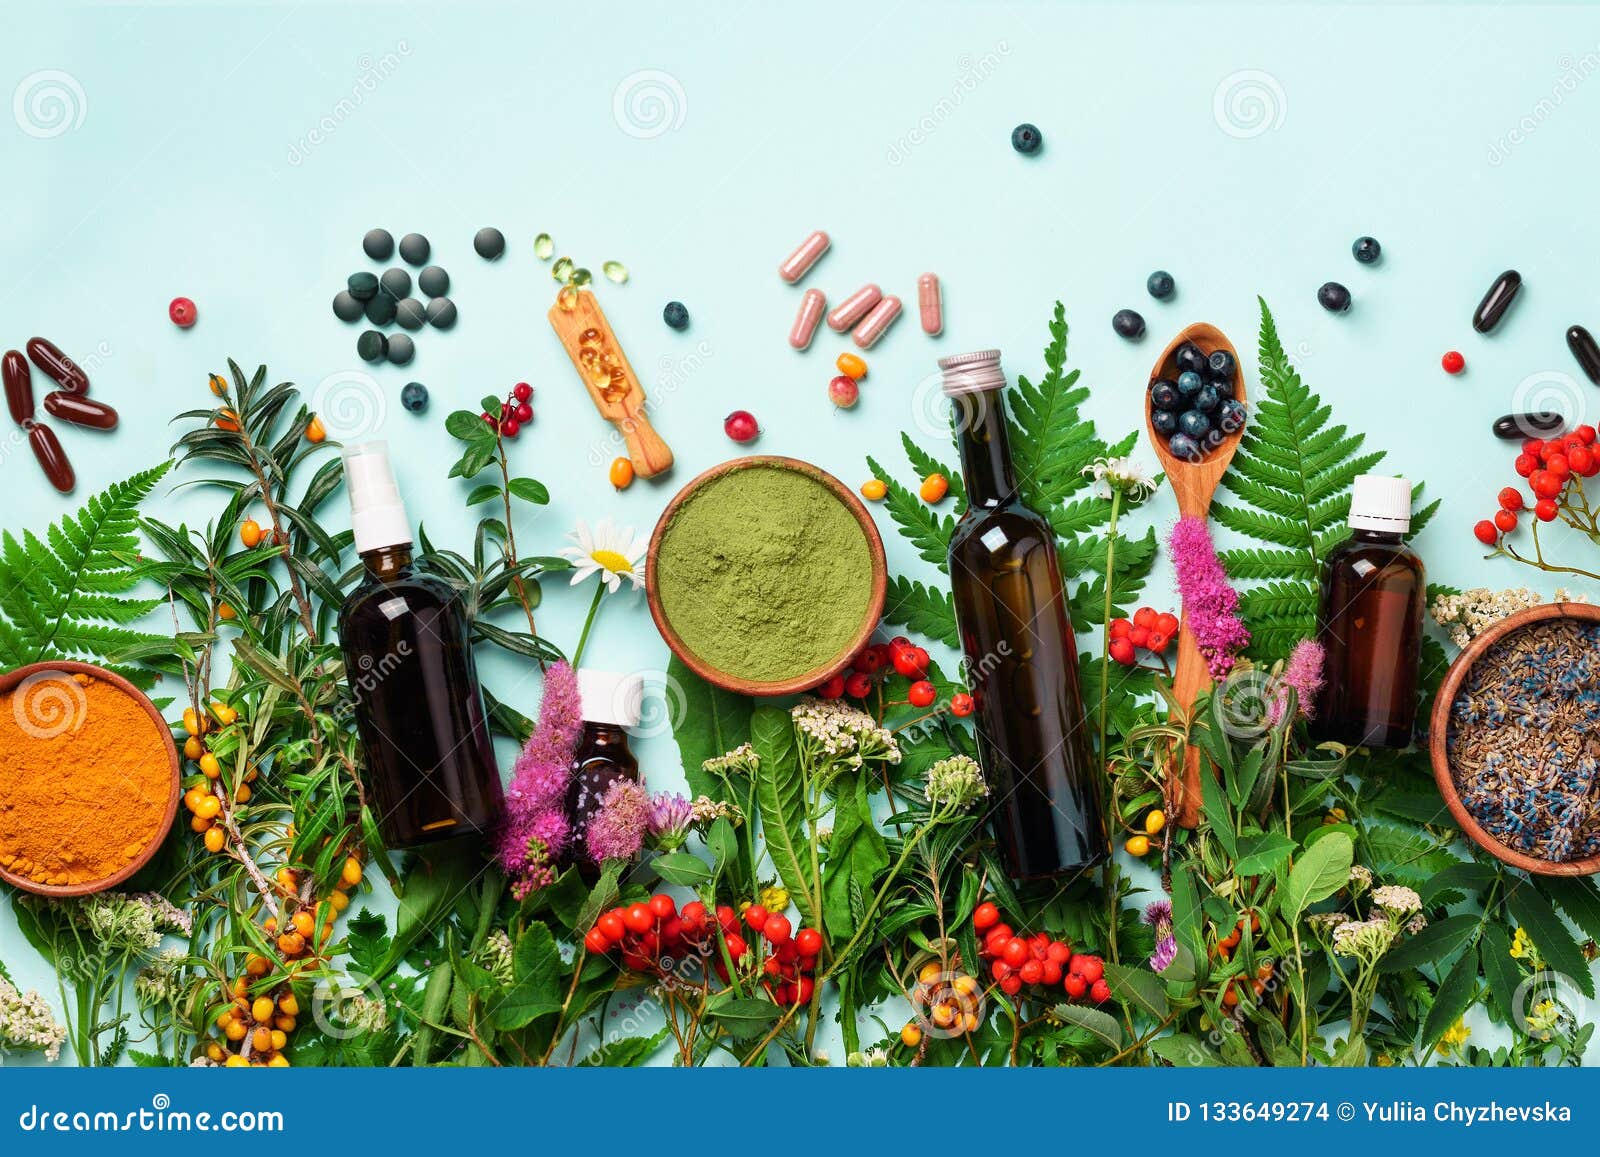 alternative medicine. holistic approach. healing herbs and flowers over blue background. top view, copy space, flat lay. banner